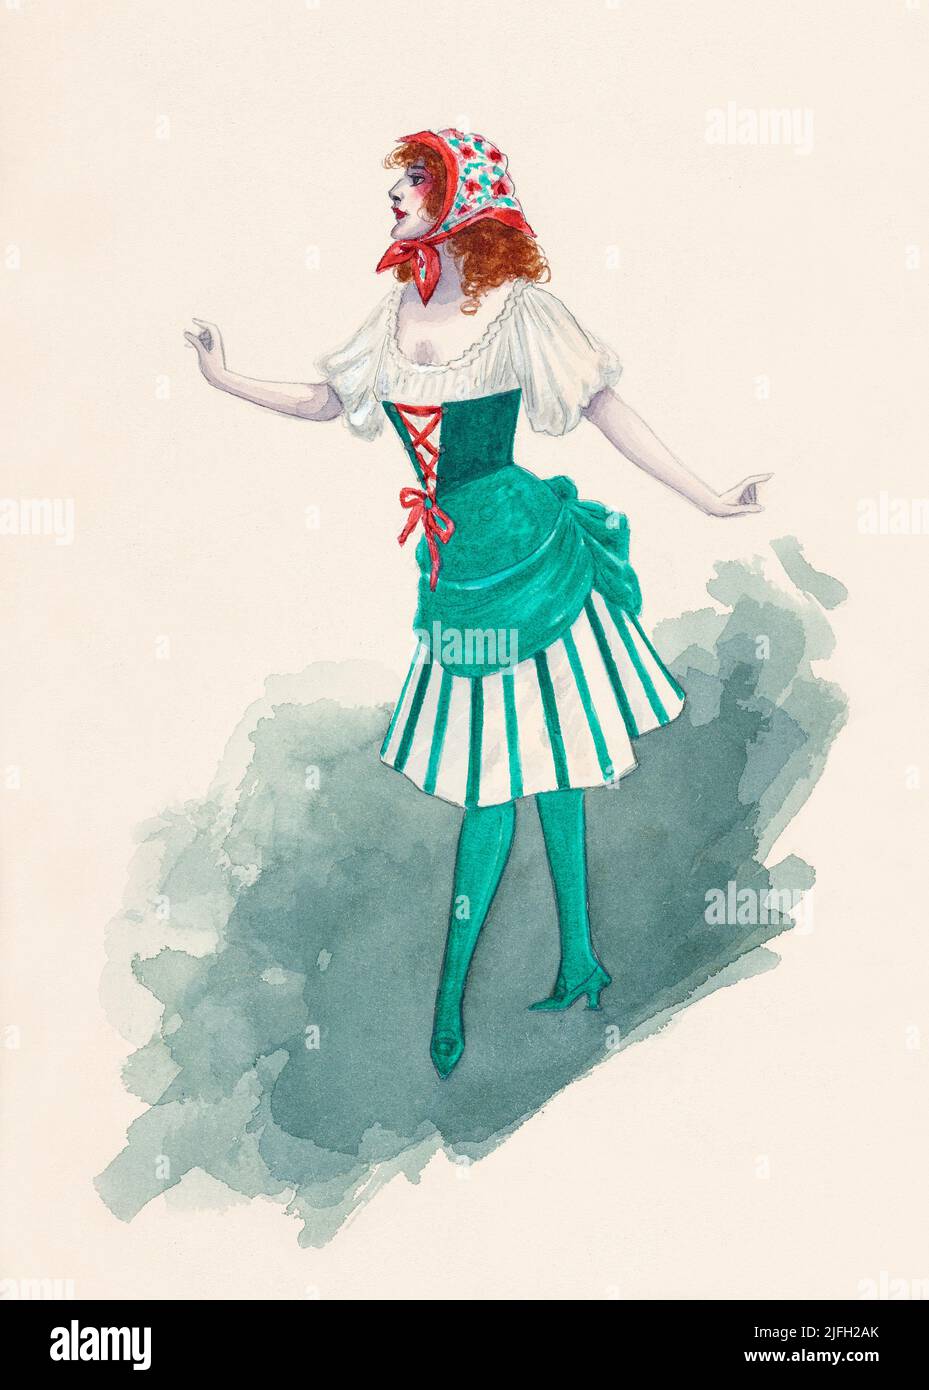 An Irish dance costume designed by Will R. Barnes for the 1913 stage play, Irish Girls. The American, designed costumes for numerous Broadway productions between 1898 and 1924. musical comedies, operettas, revues, vaudeville productions and burlesques. Stock Photo